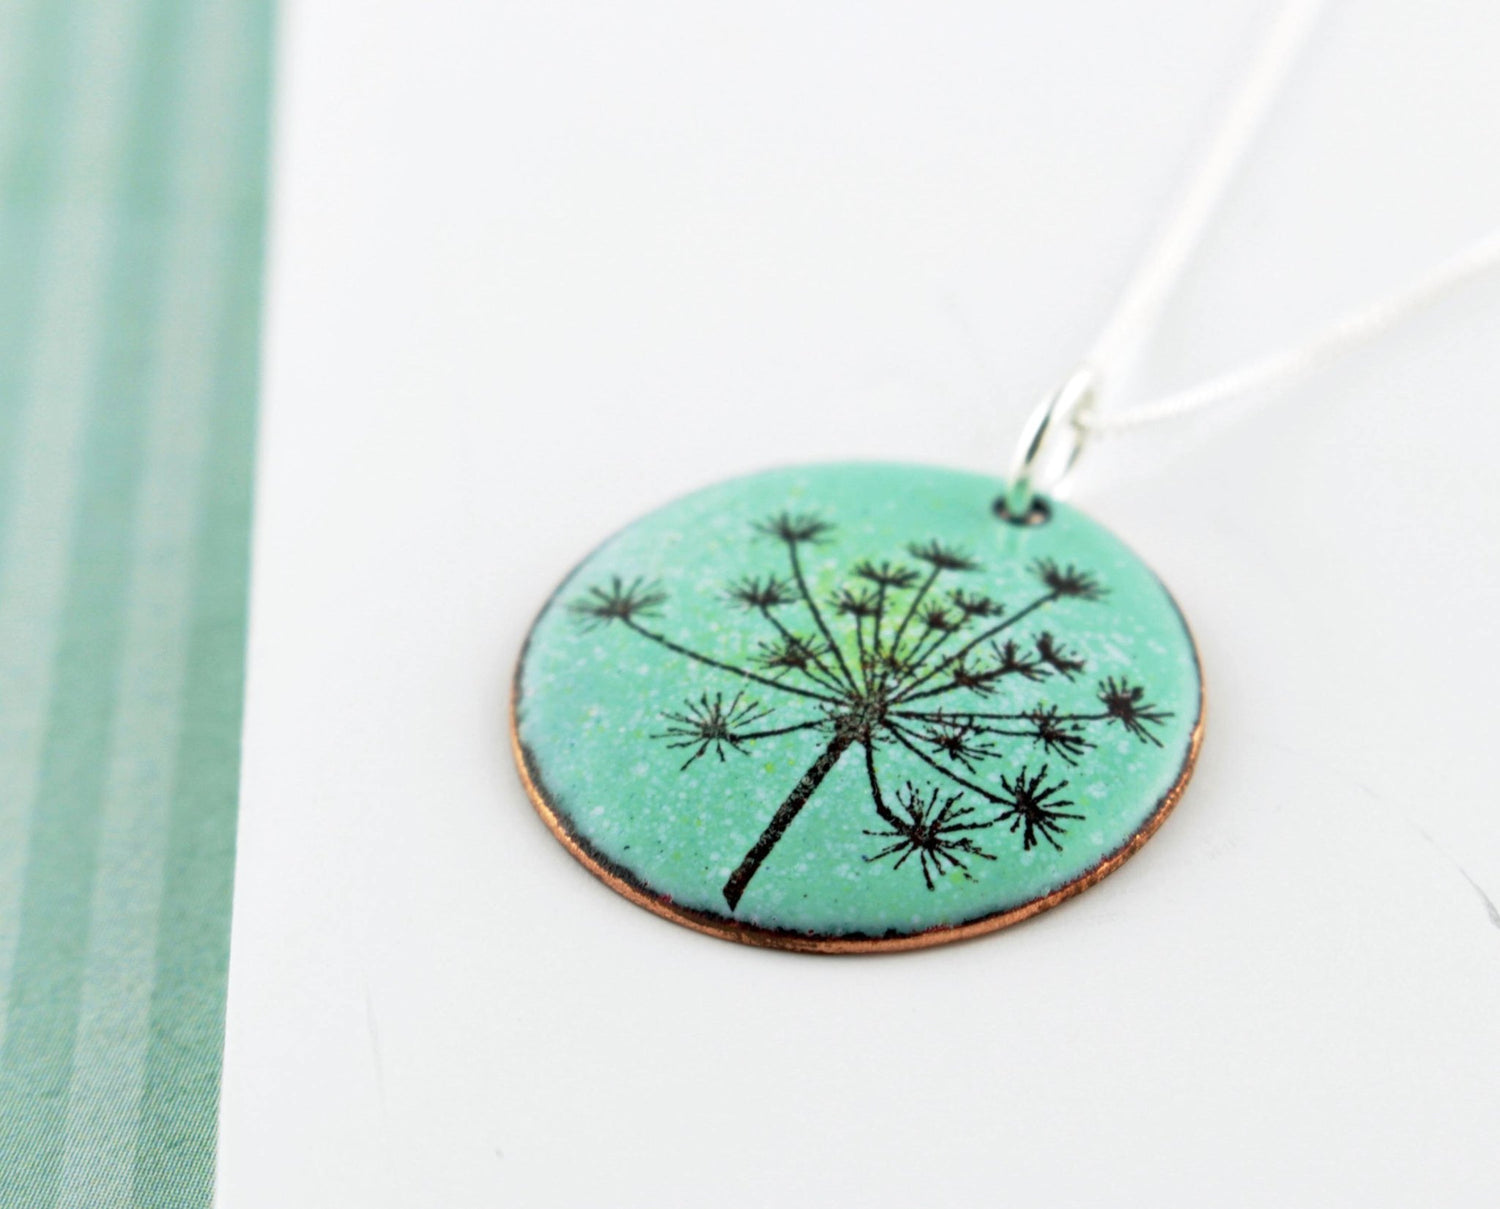 Cow Parsley Enamel Pendant on 18' sterling silver chain available in blue, green, lilac/pink - Katie Johnston Jewellery